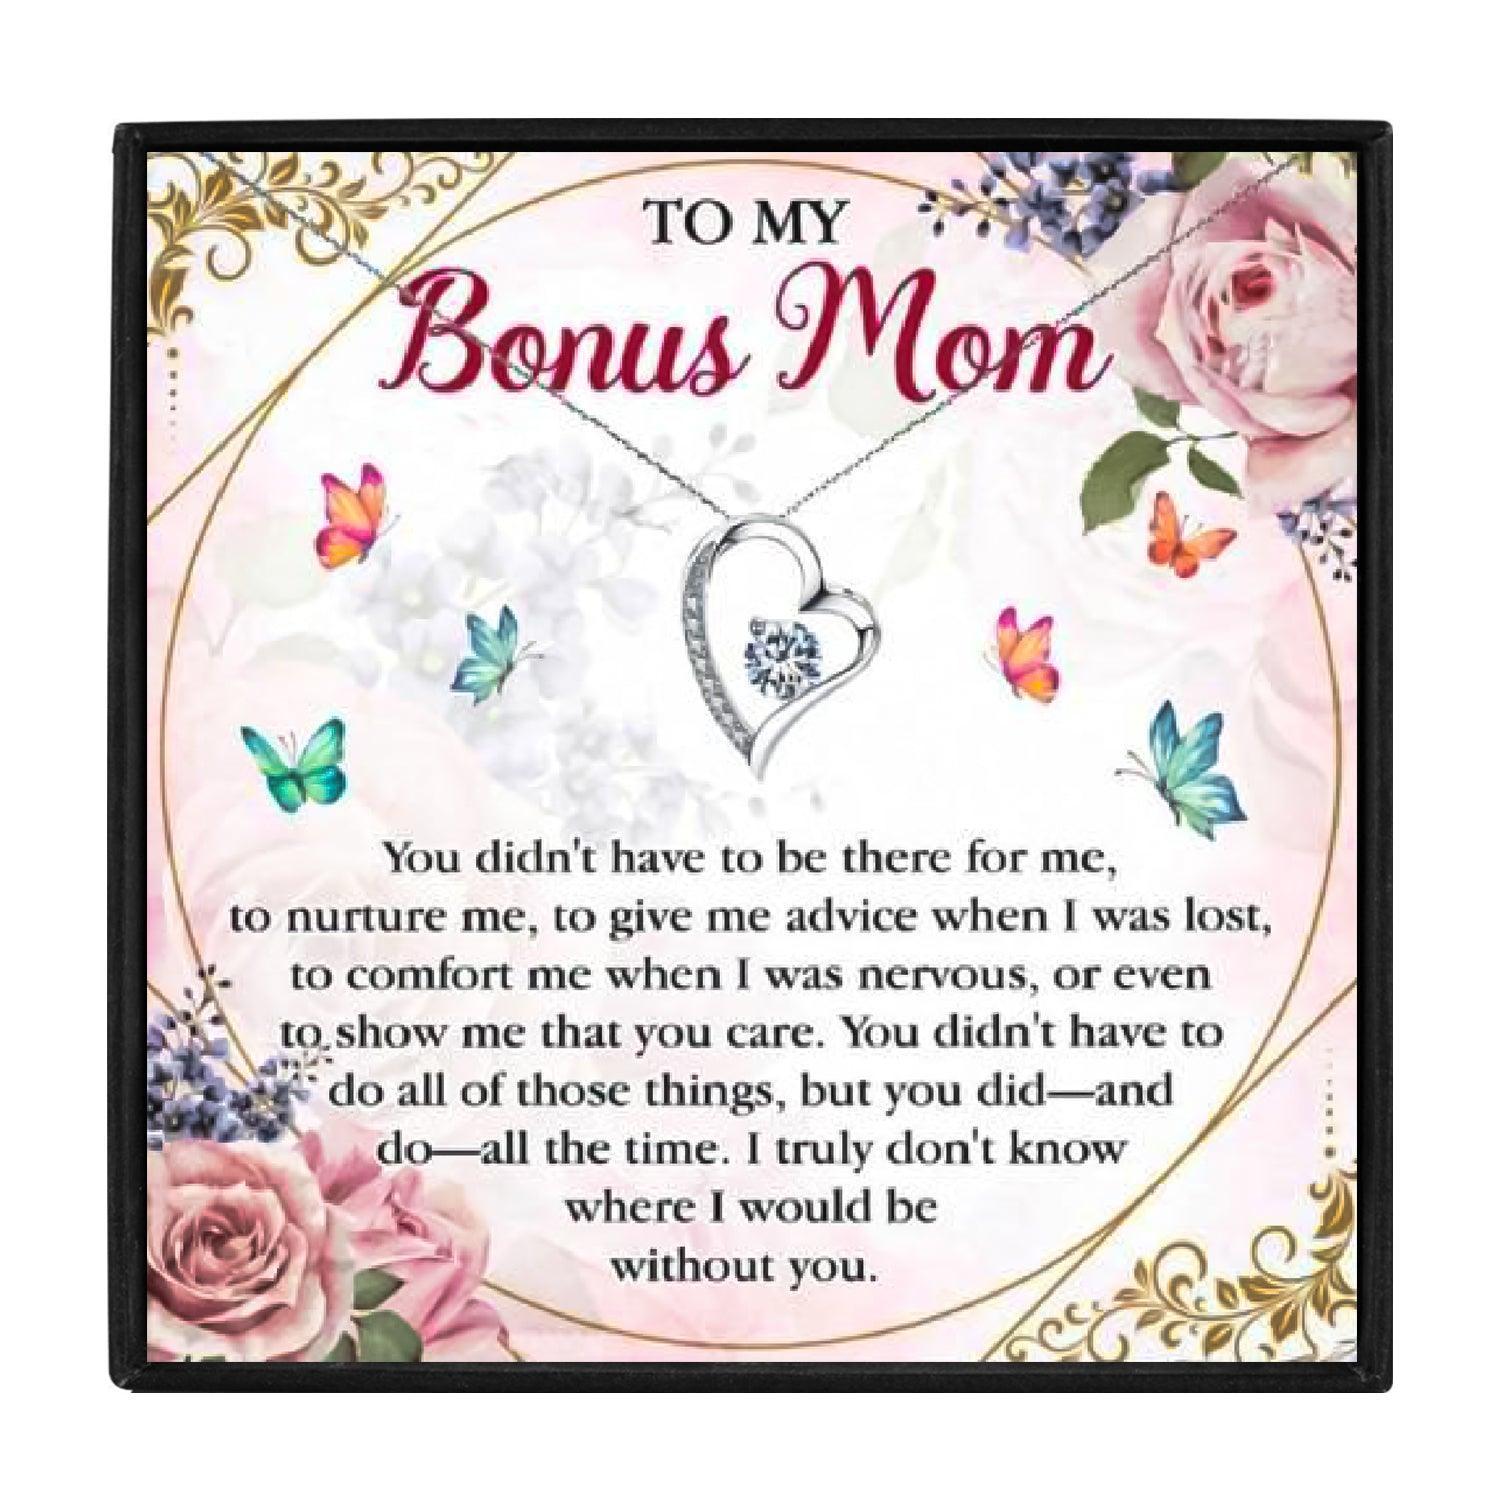 Gifts for Bonus Mom Necklace for Christmas 2023 | Gifts for Bonus Mom Necklace - undefined | Bonus Mom Necklace, Bonus Mom Necklace Family Gifts, Bonus Mom Necklace Gift, Gifts for Bonus Mom, Gifts for Bonus Mom Necklace | From Hunny Life | hunnylife.com